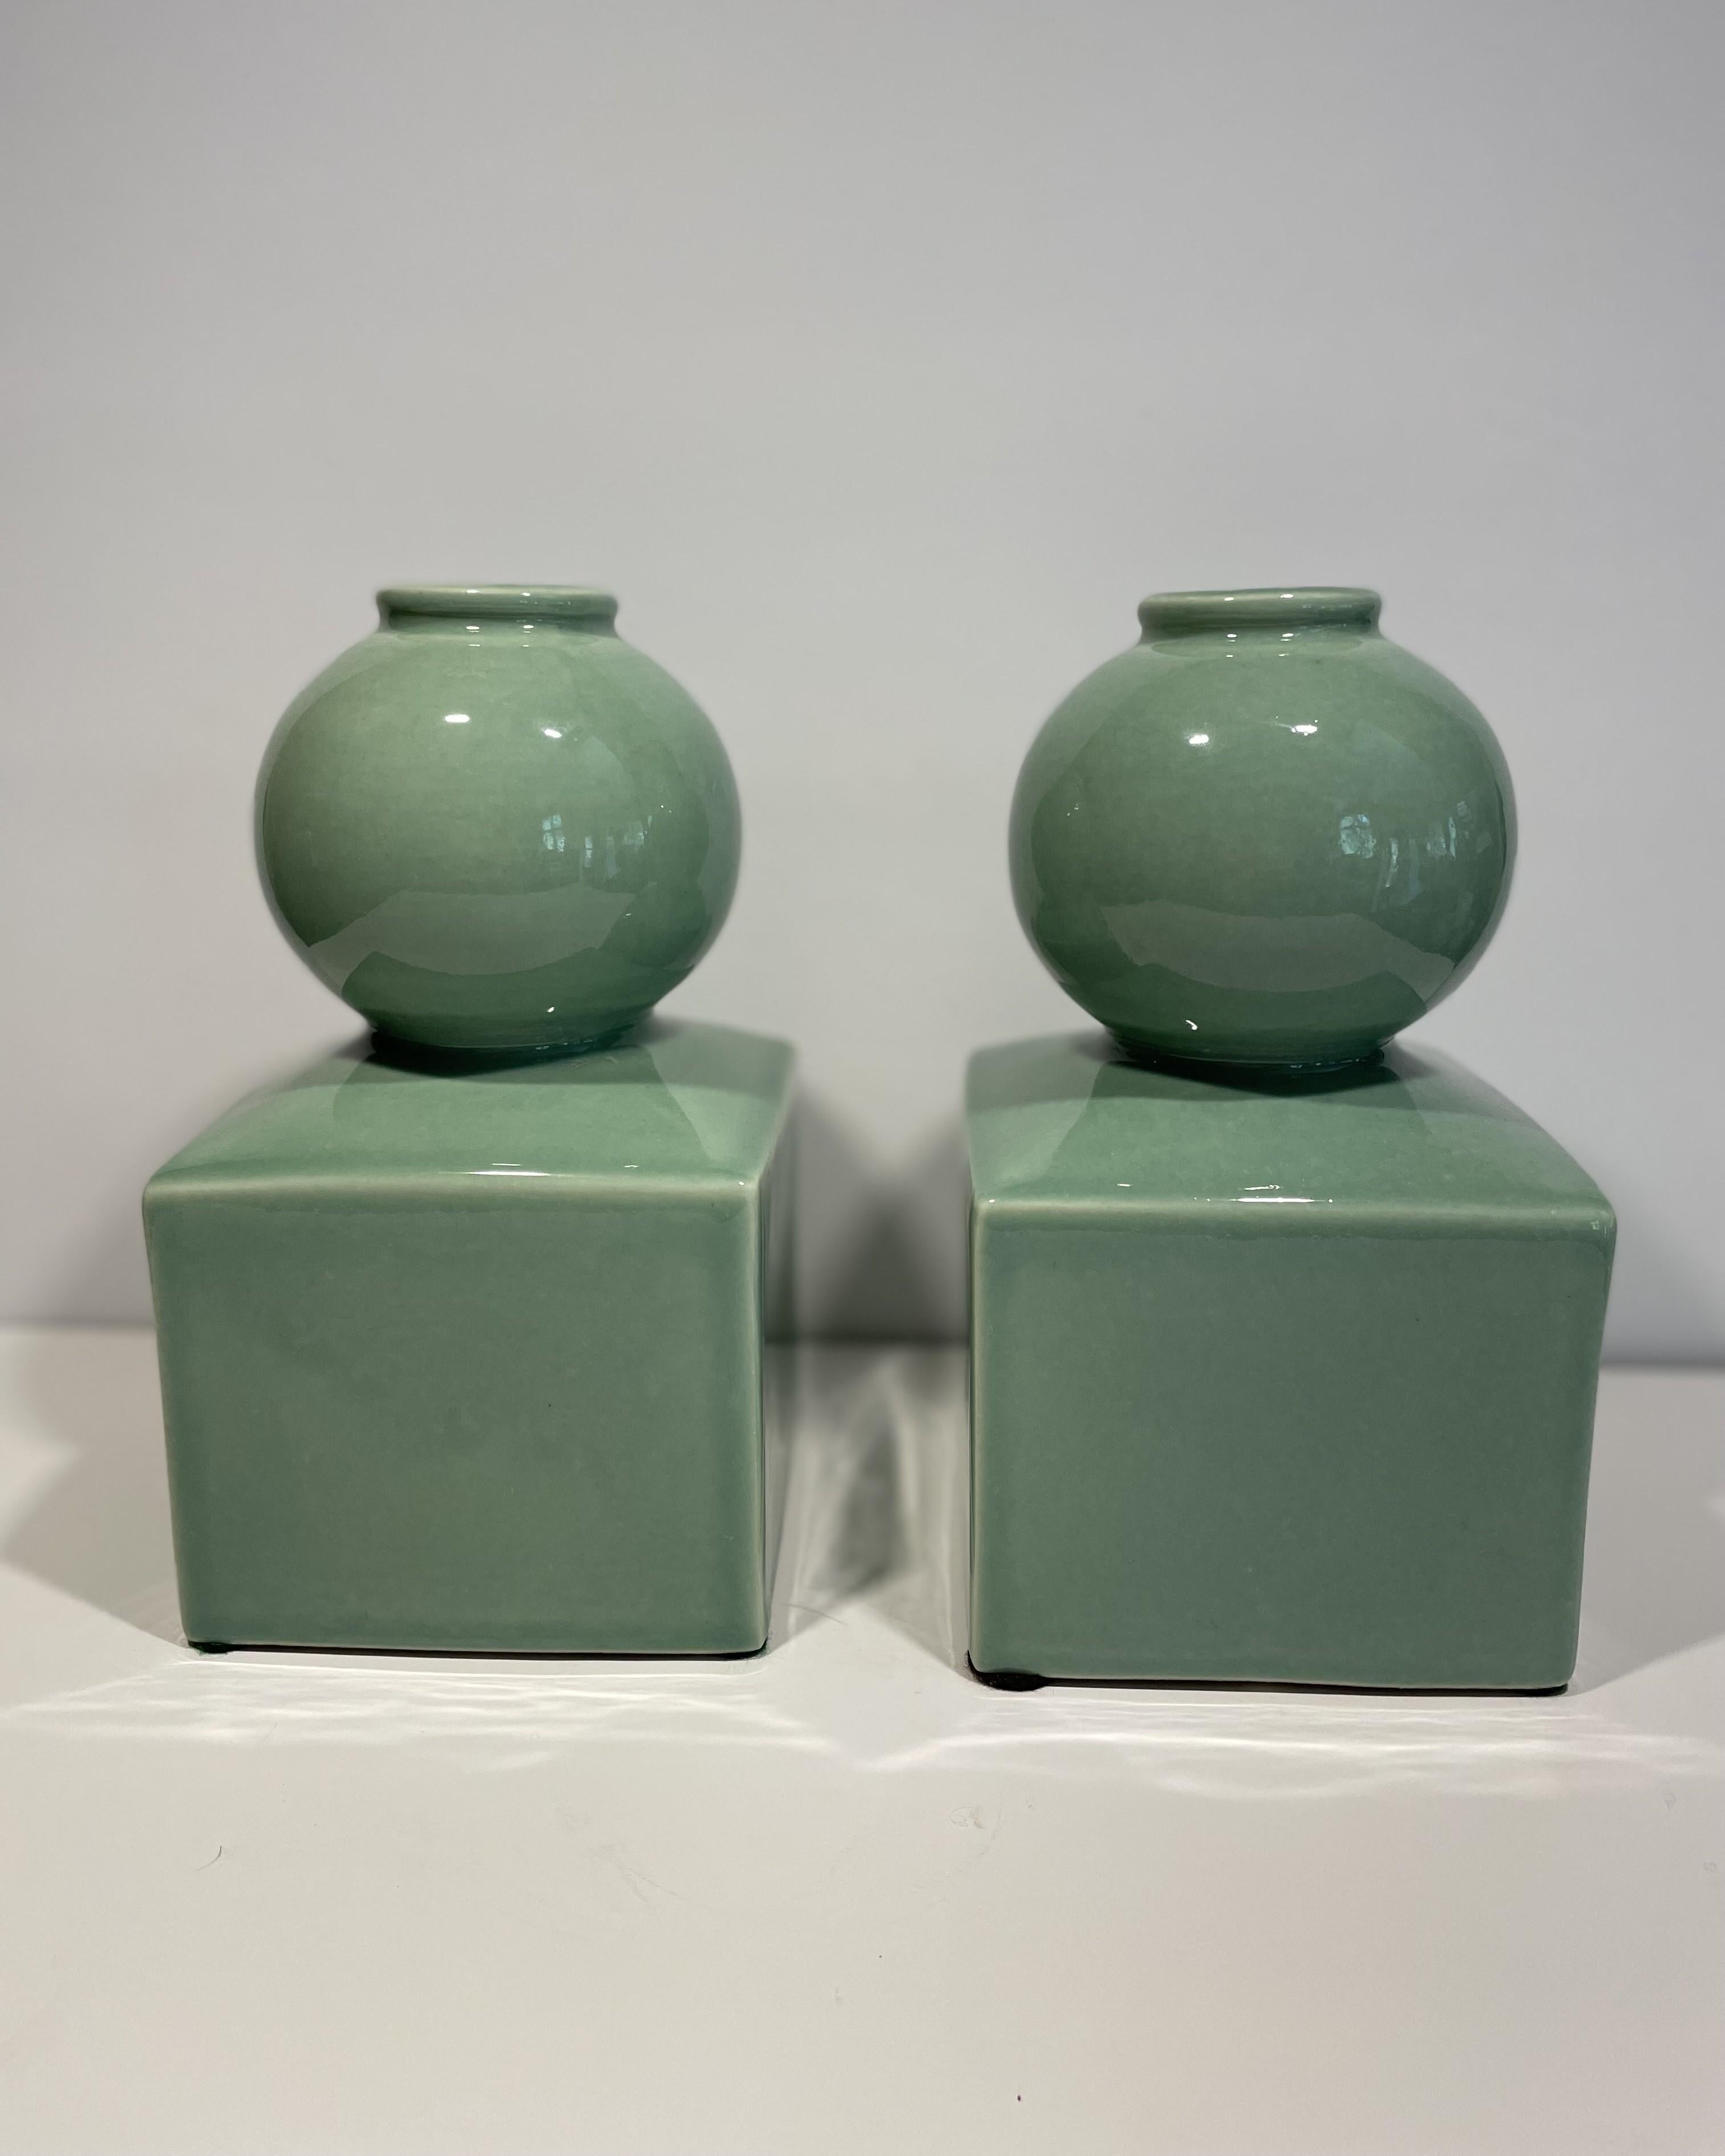 Organic Modern Celadon Ceramic Vases or Bookends Attributed to Serena & Lily -- A Pair For Sale